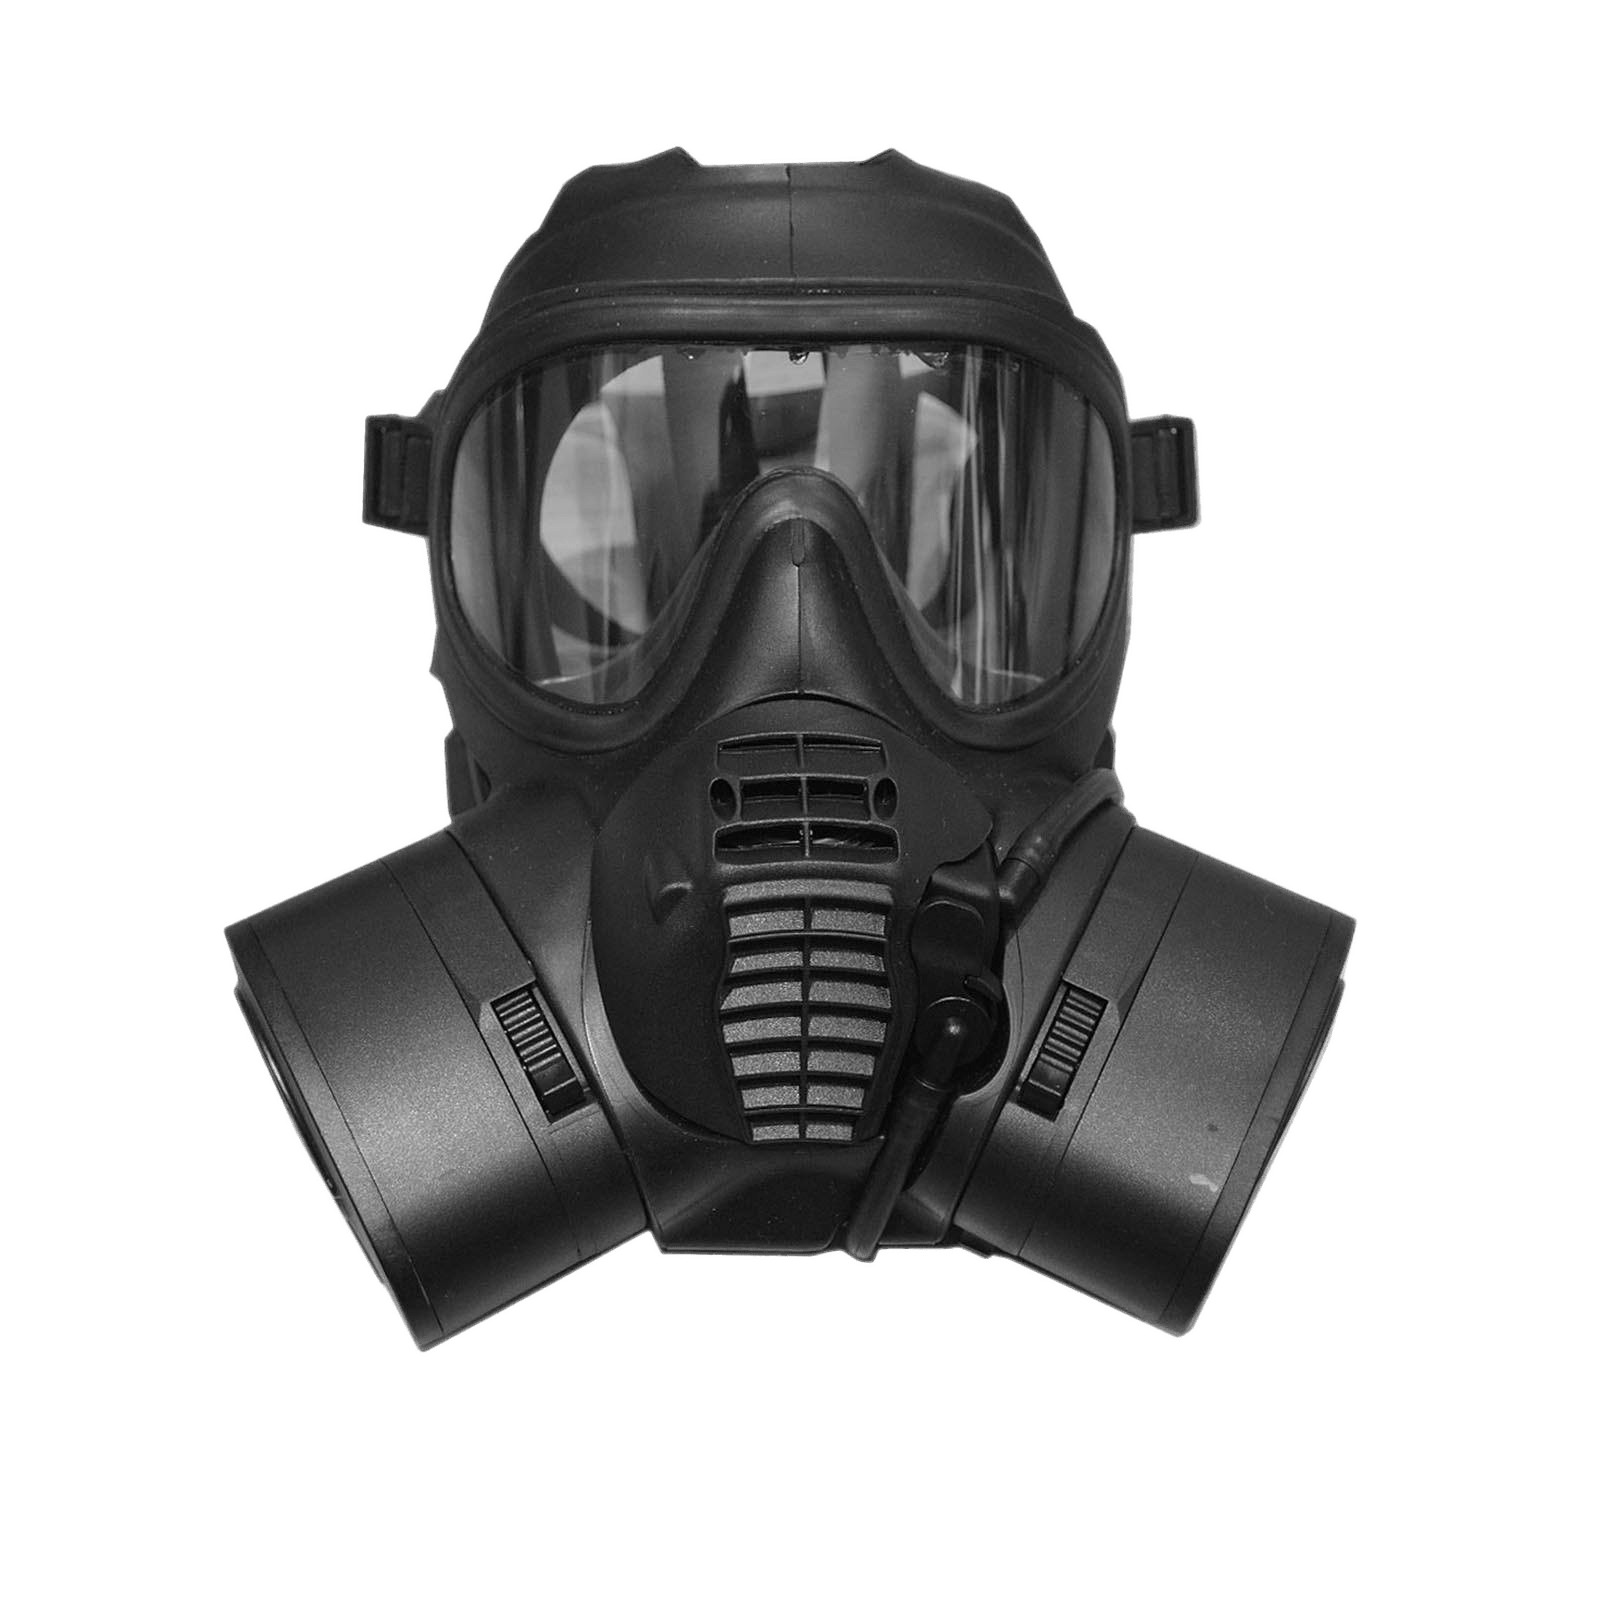 British Army GSR Gas Mask png icons